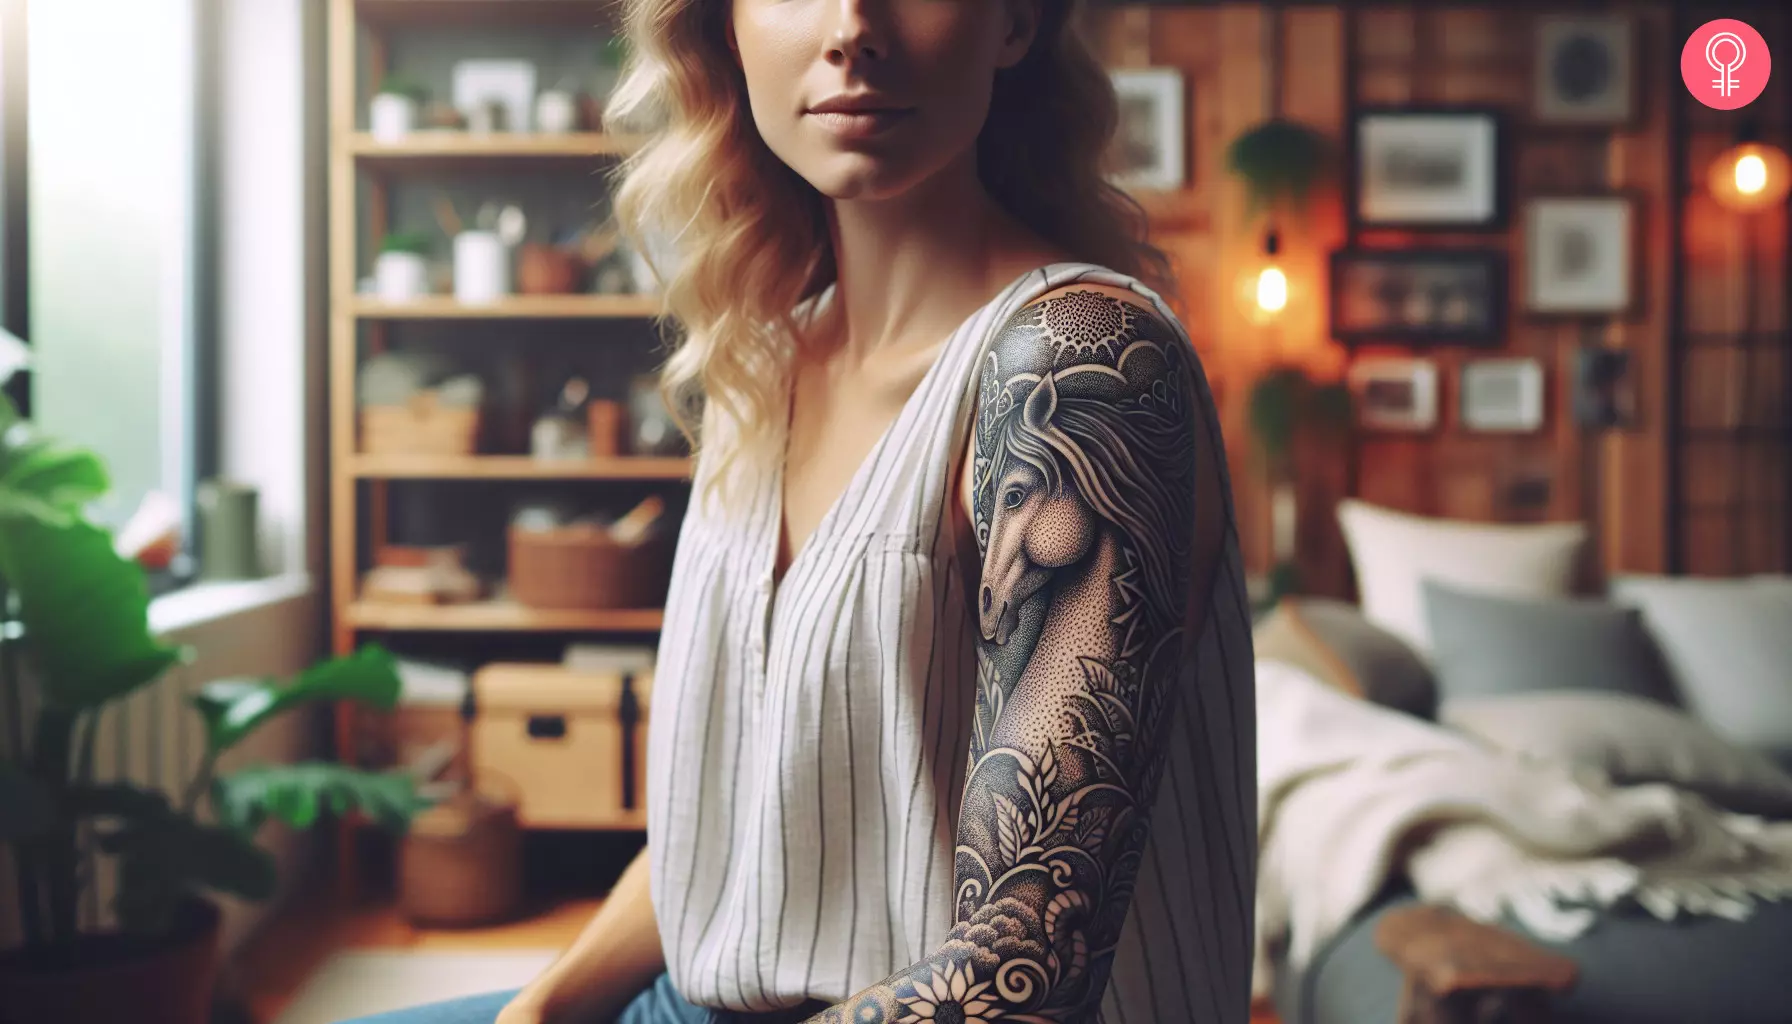 Woman with a horse sleeve tattoo on her arm